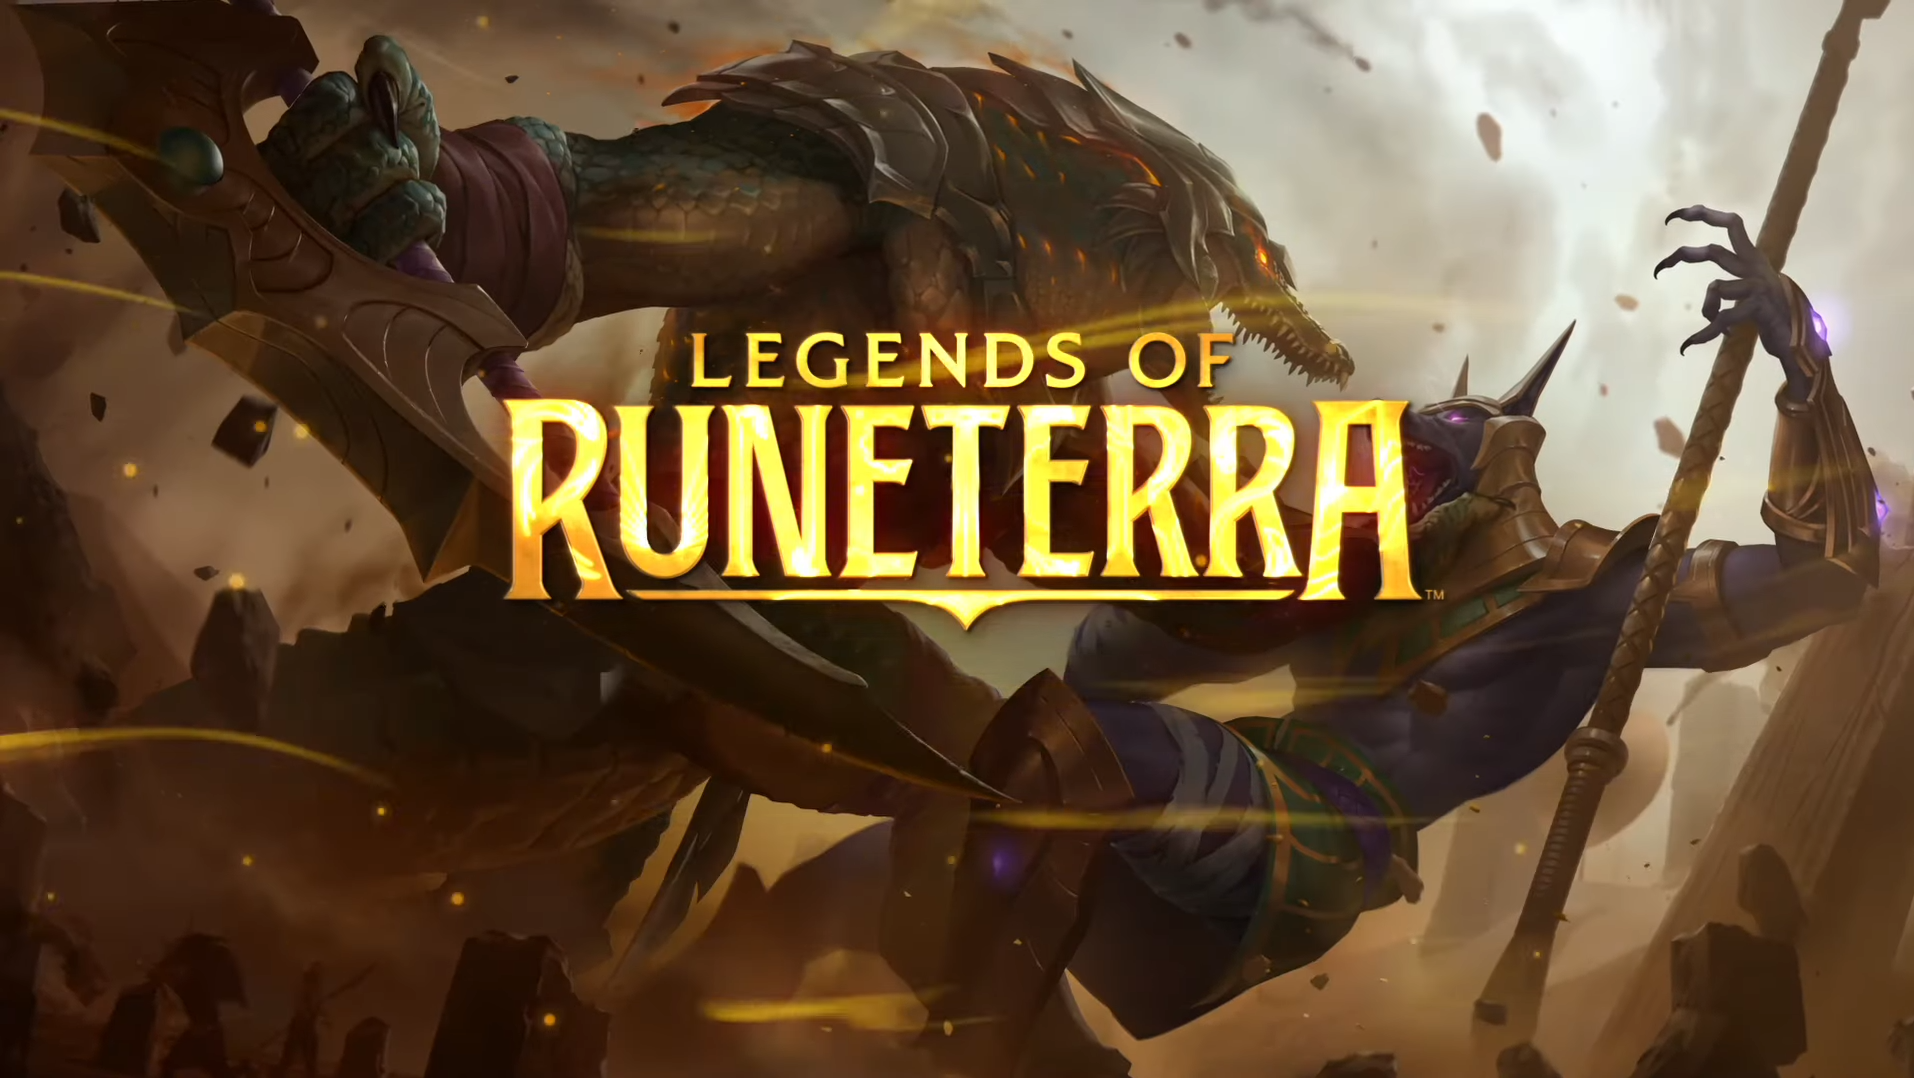 Renekton to join the Shurima champion roster in Legends of Runeterra's Empires of the Ascended expansion Dot